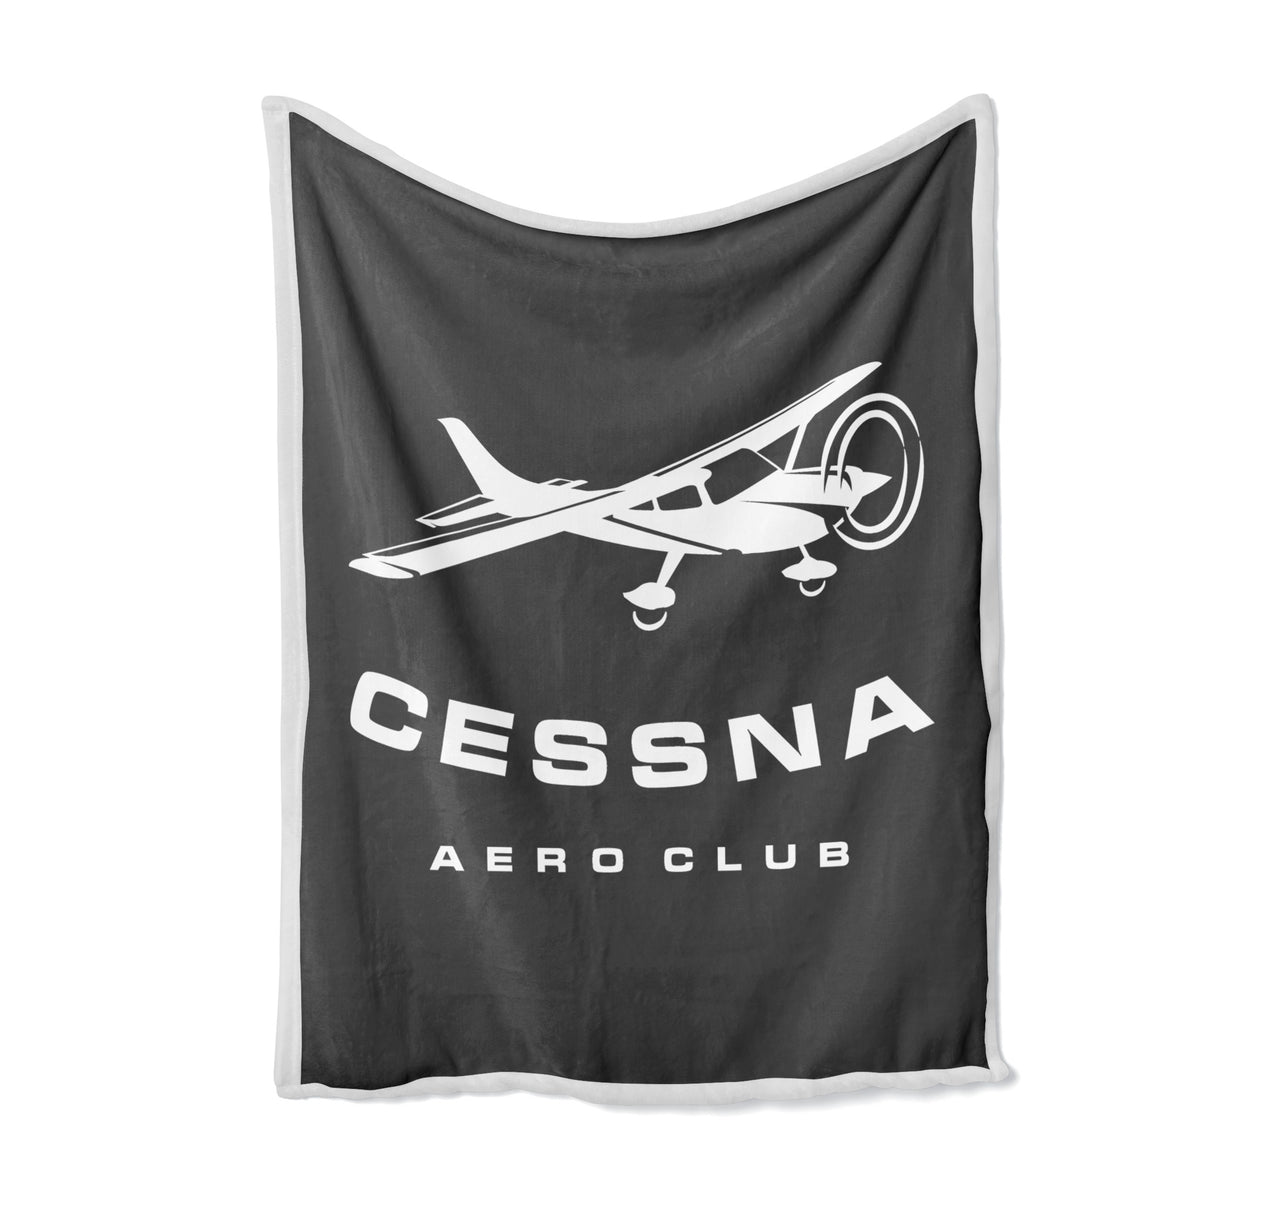 Cessna Aeroclub Designed Bed Blankets & Covers